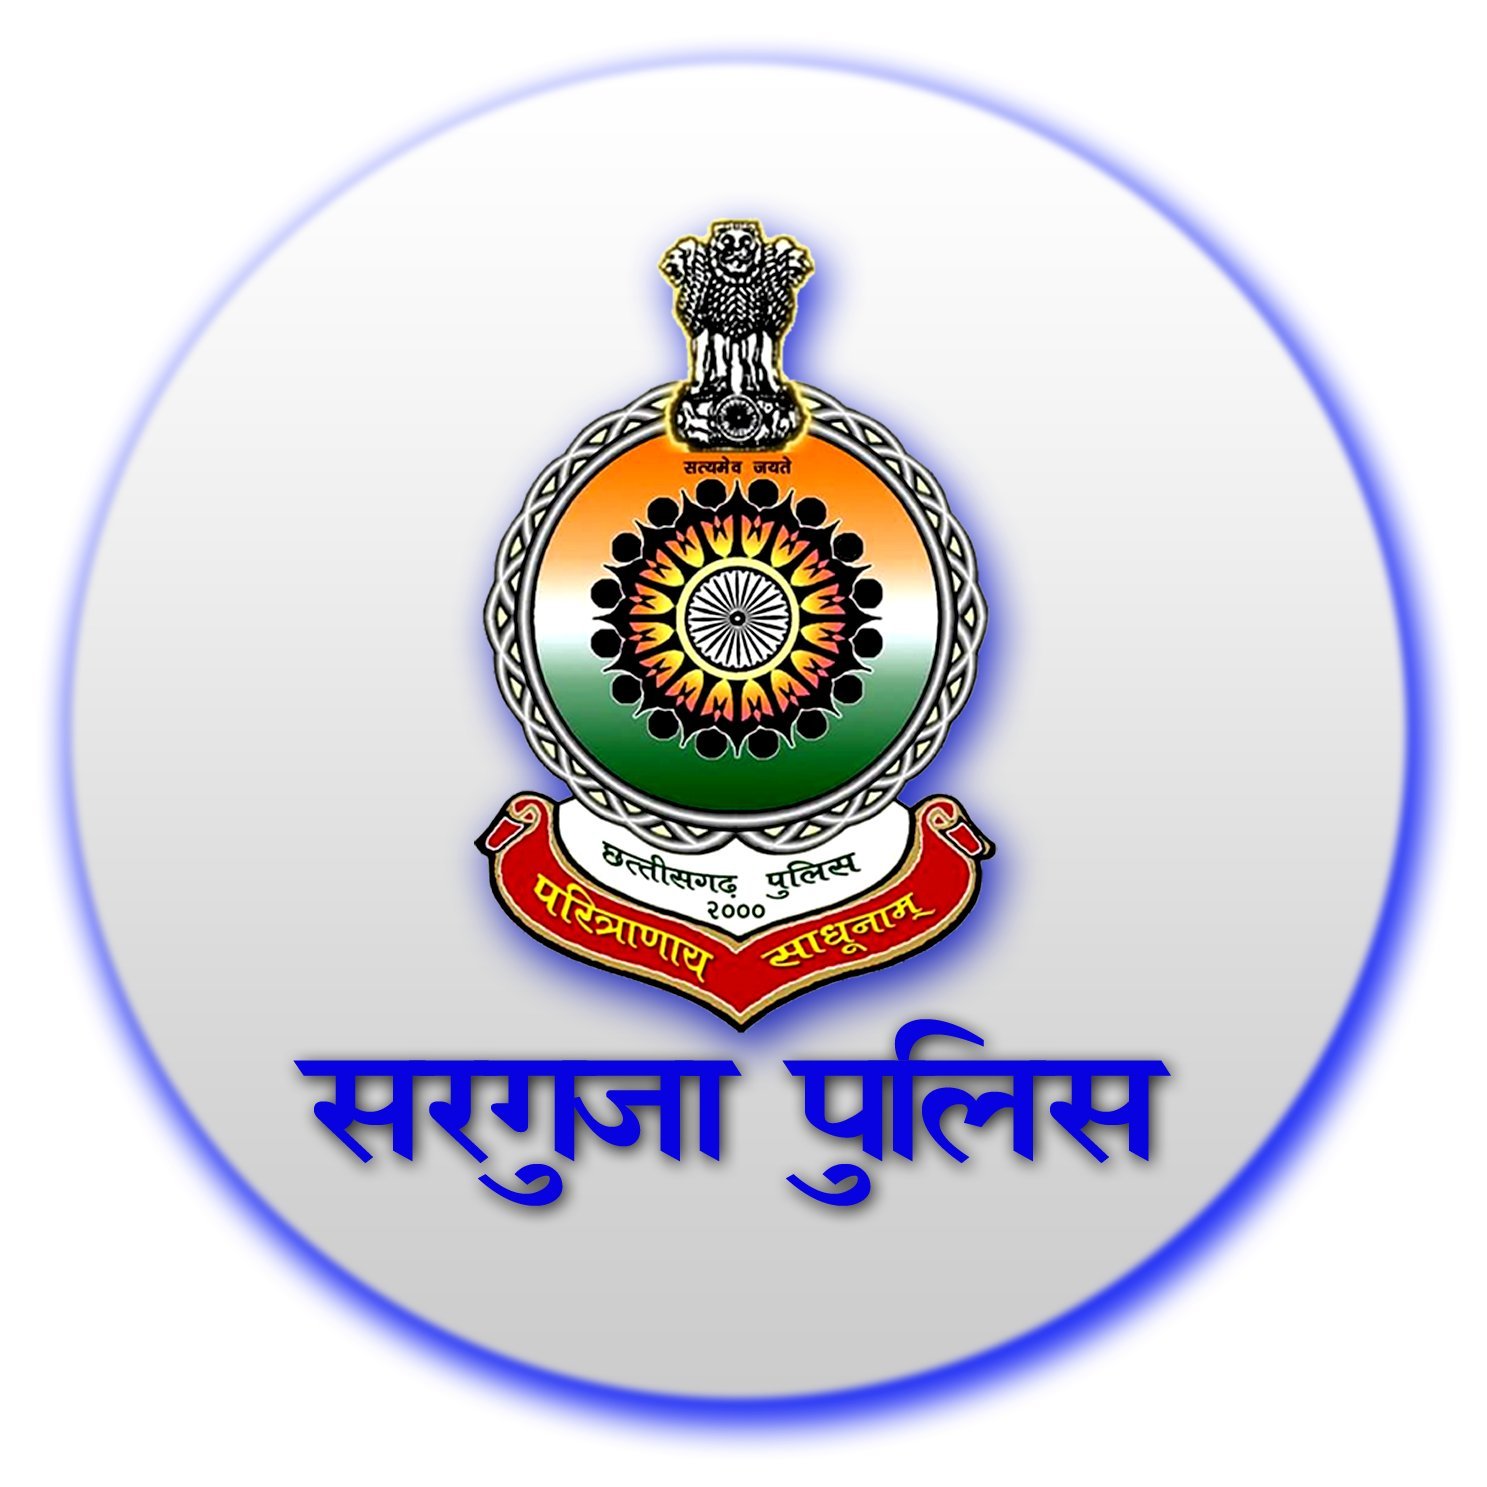 Through the social media, the Sarguja Police directly connects with you and expects cooperation from all of you in the better creation of society.